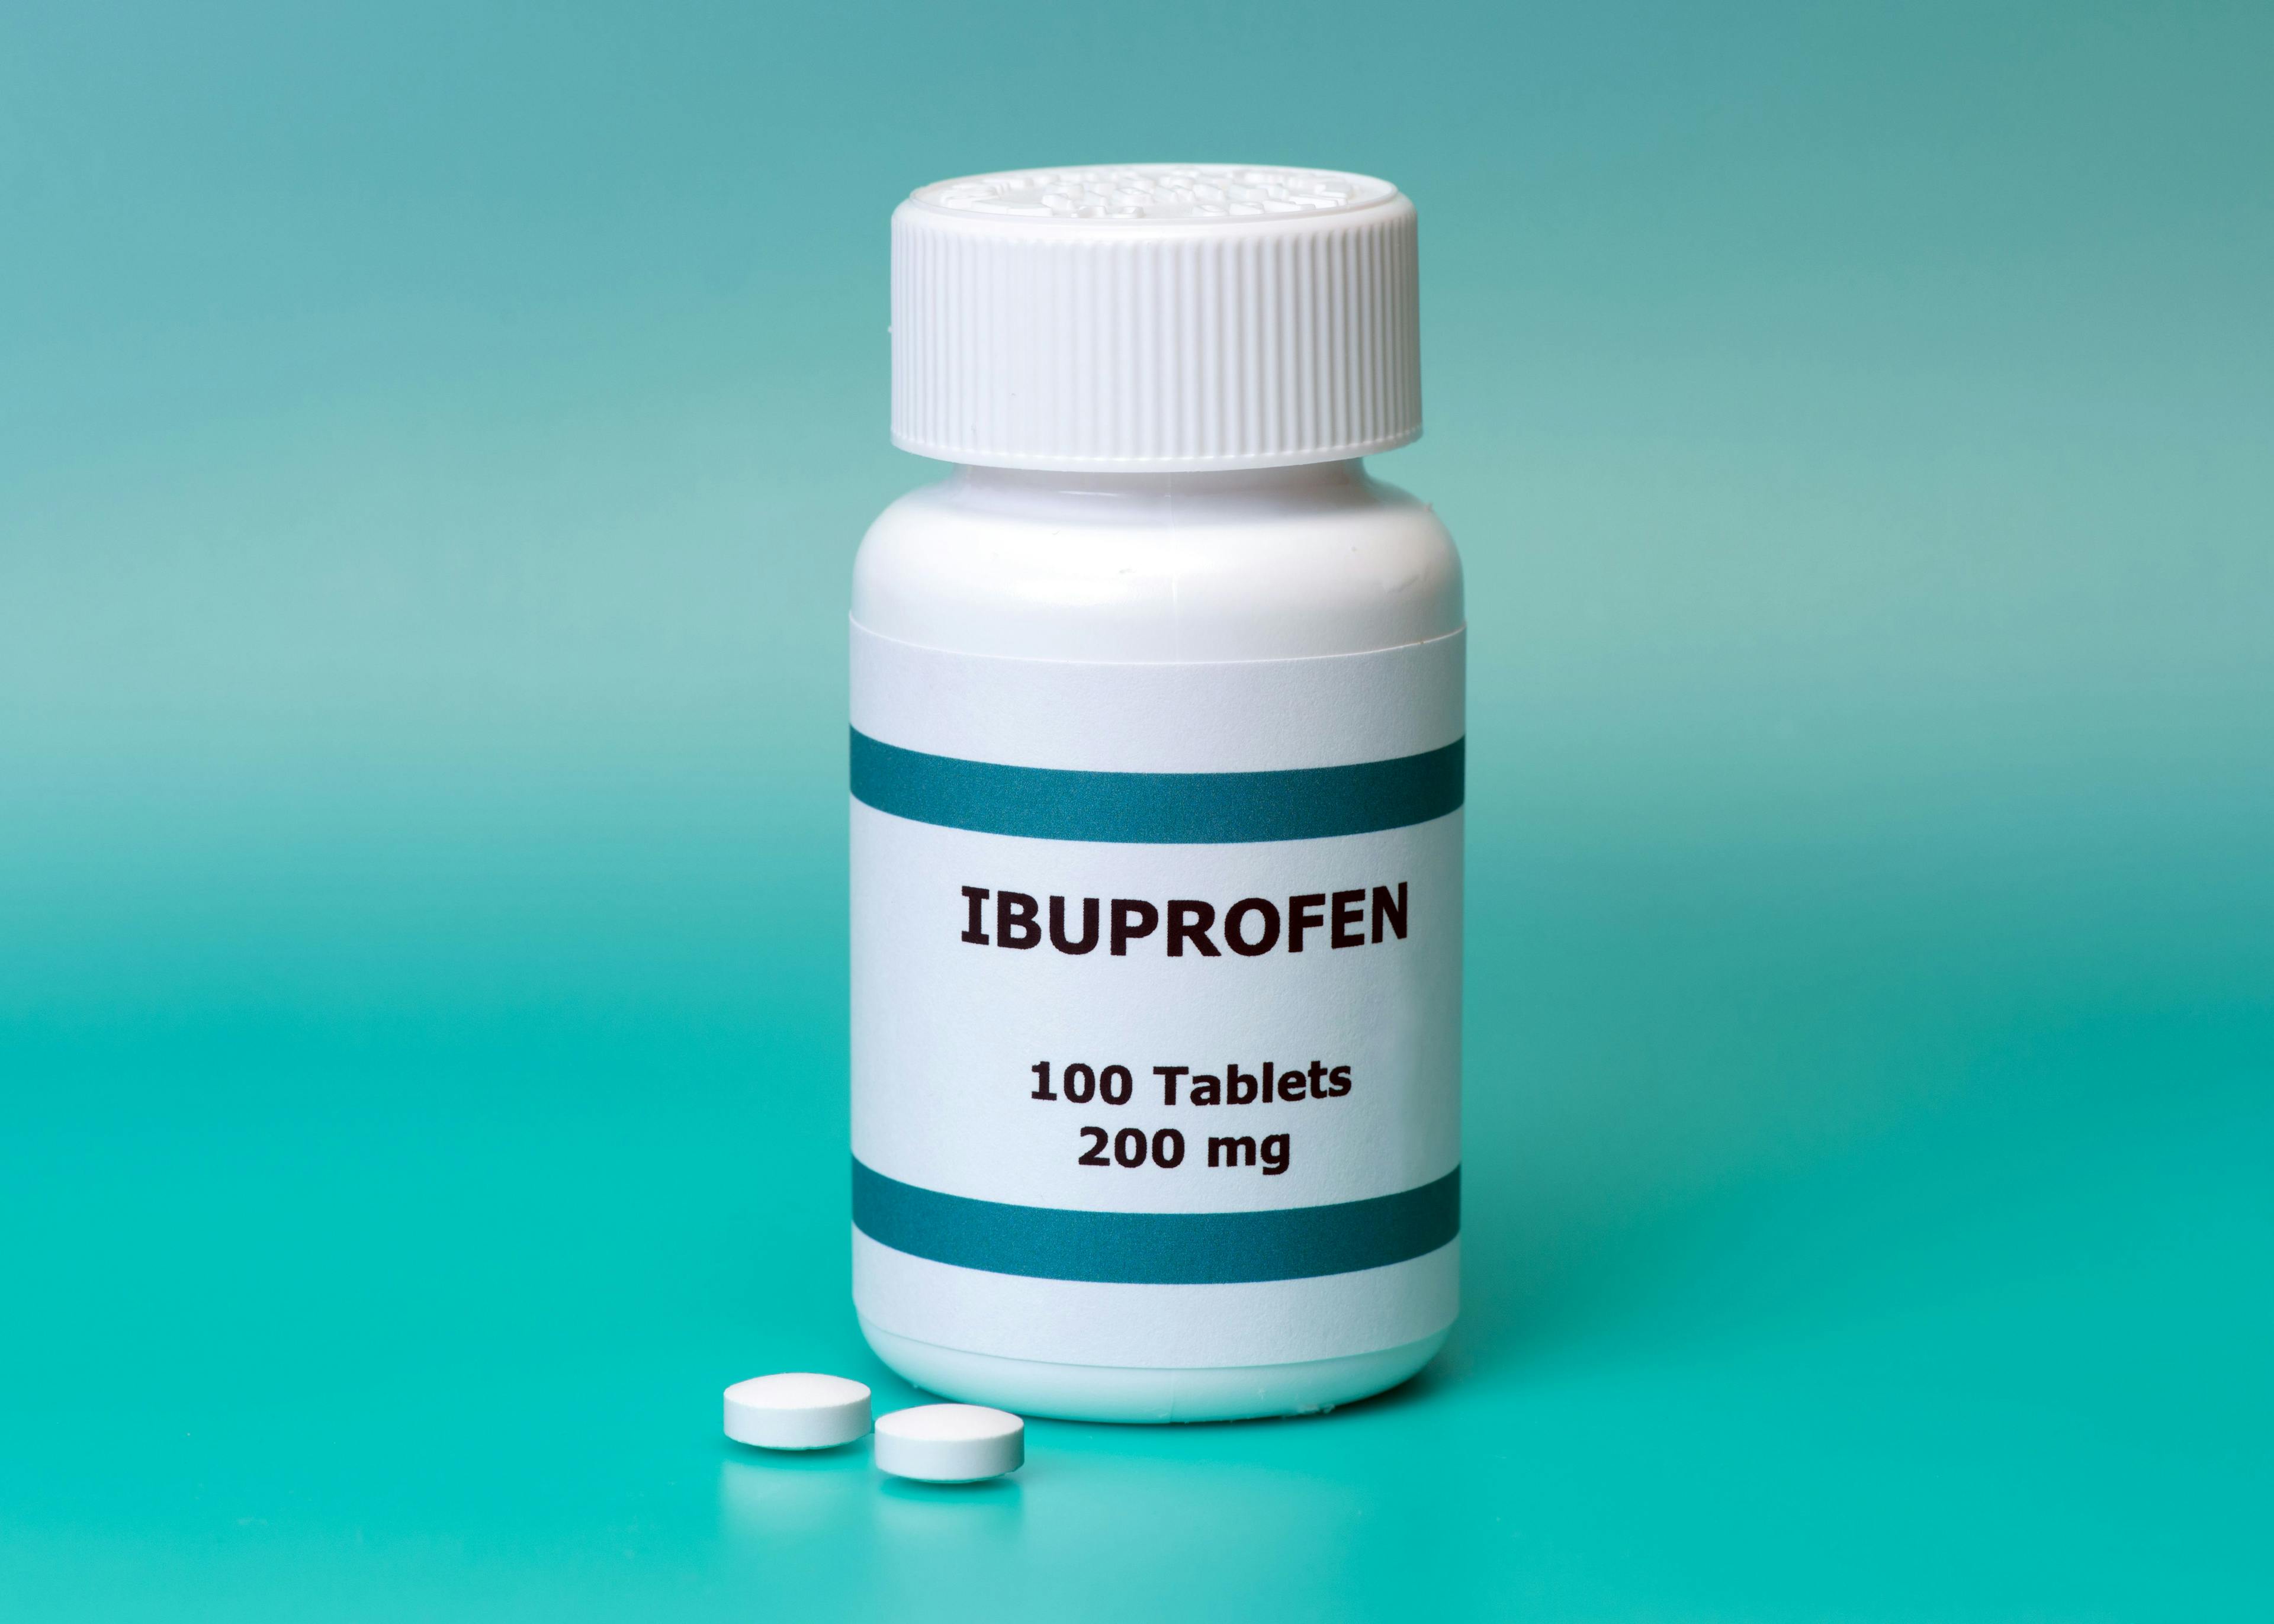 French Health Minister Stirs Up Questions About Ibuprofen, COVID-19